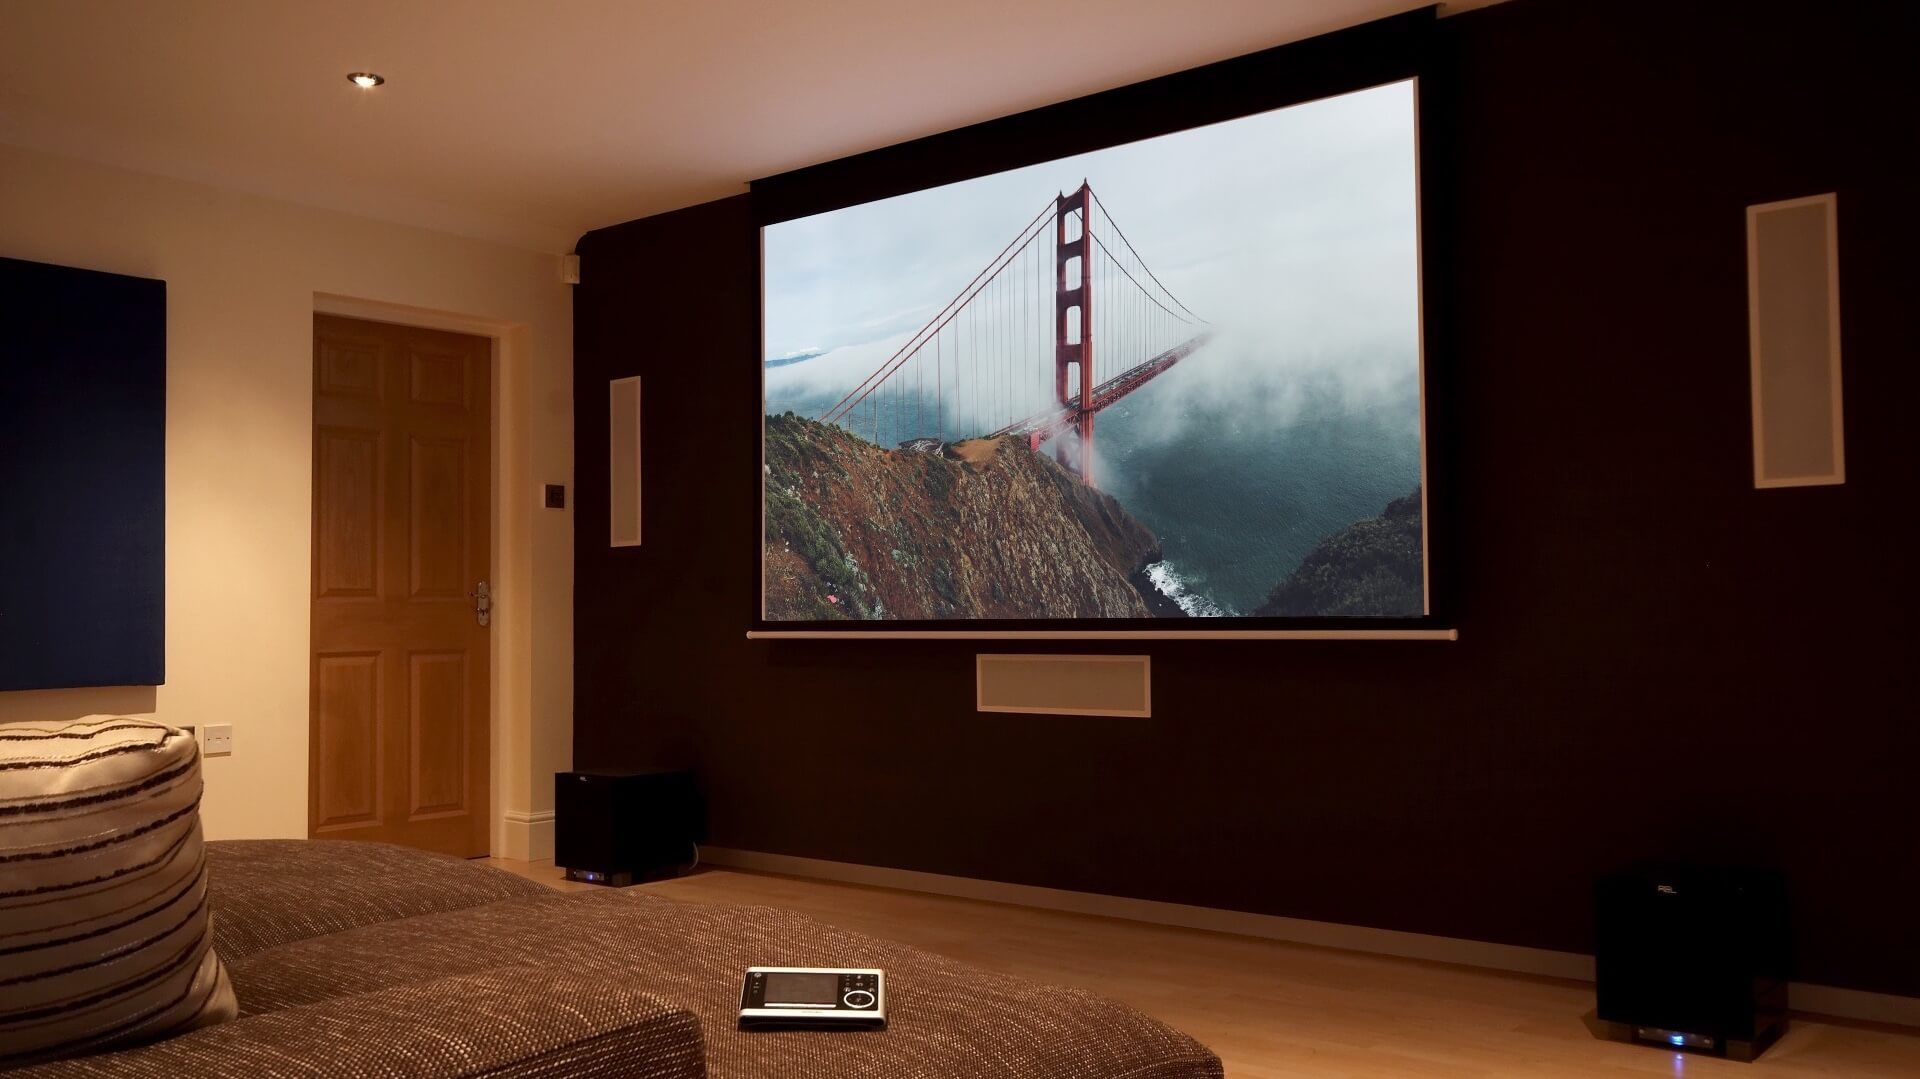 How To Use A Projector As A TV